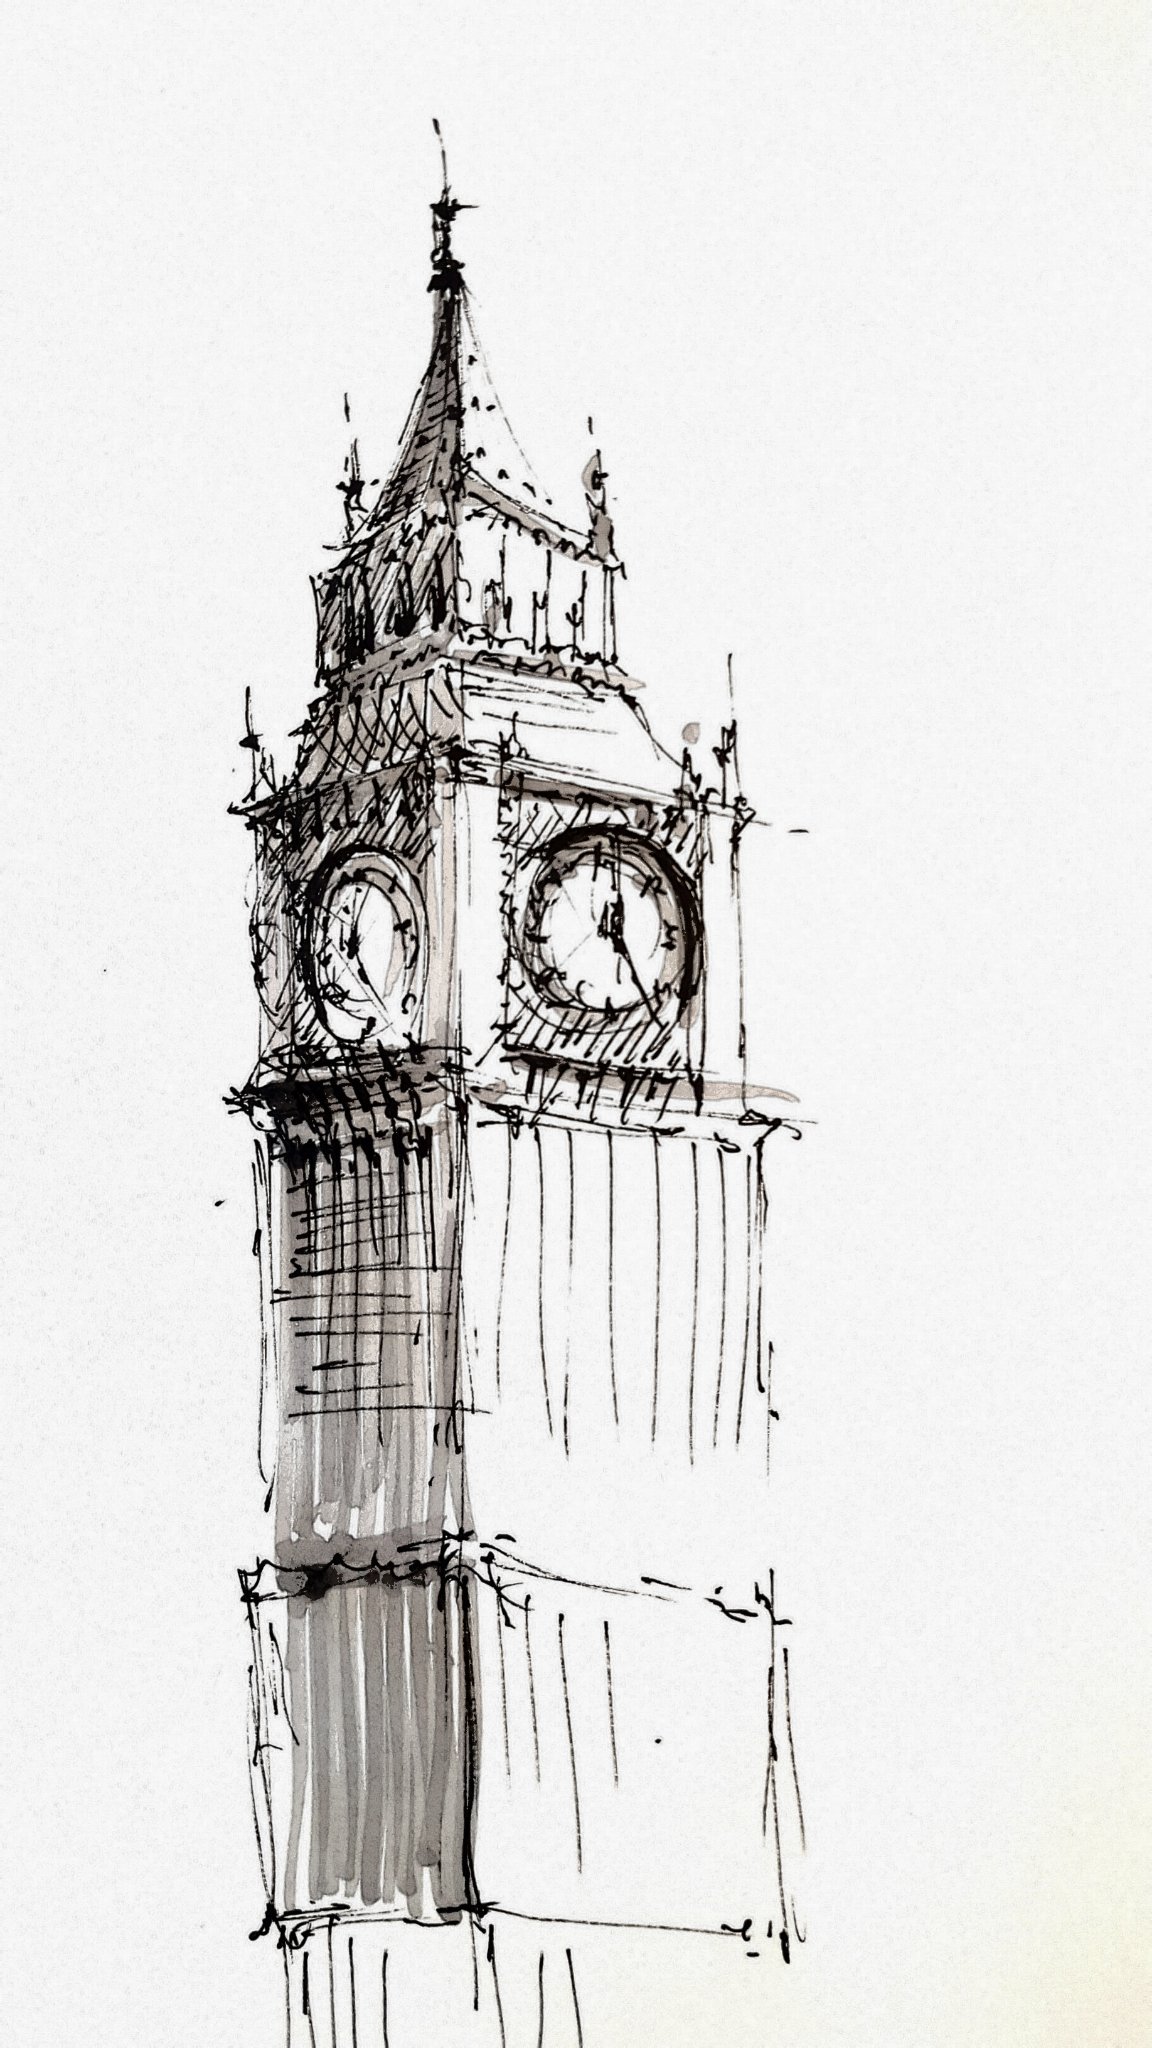 Big Ben Drawing - How To Draw Big Ben Step By Step